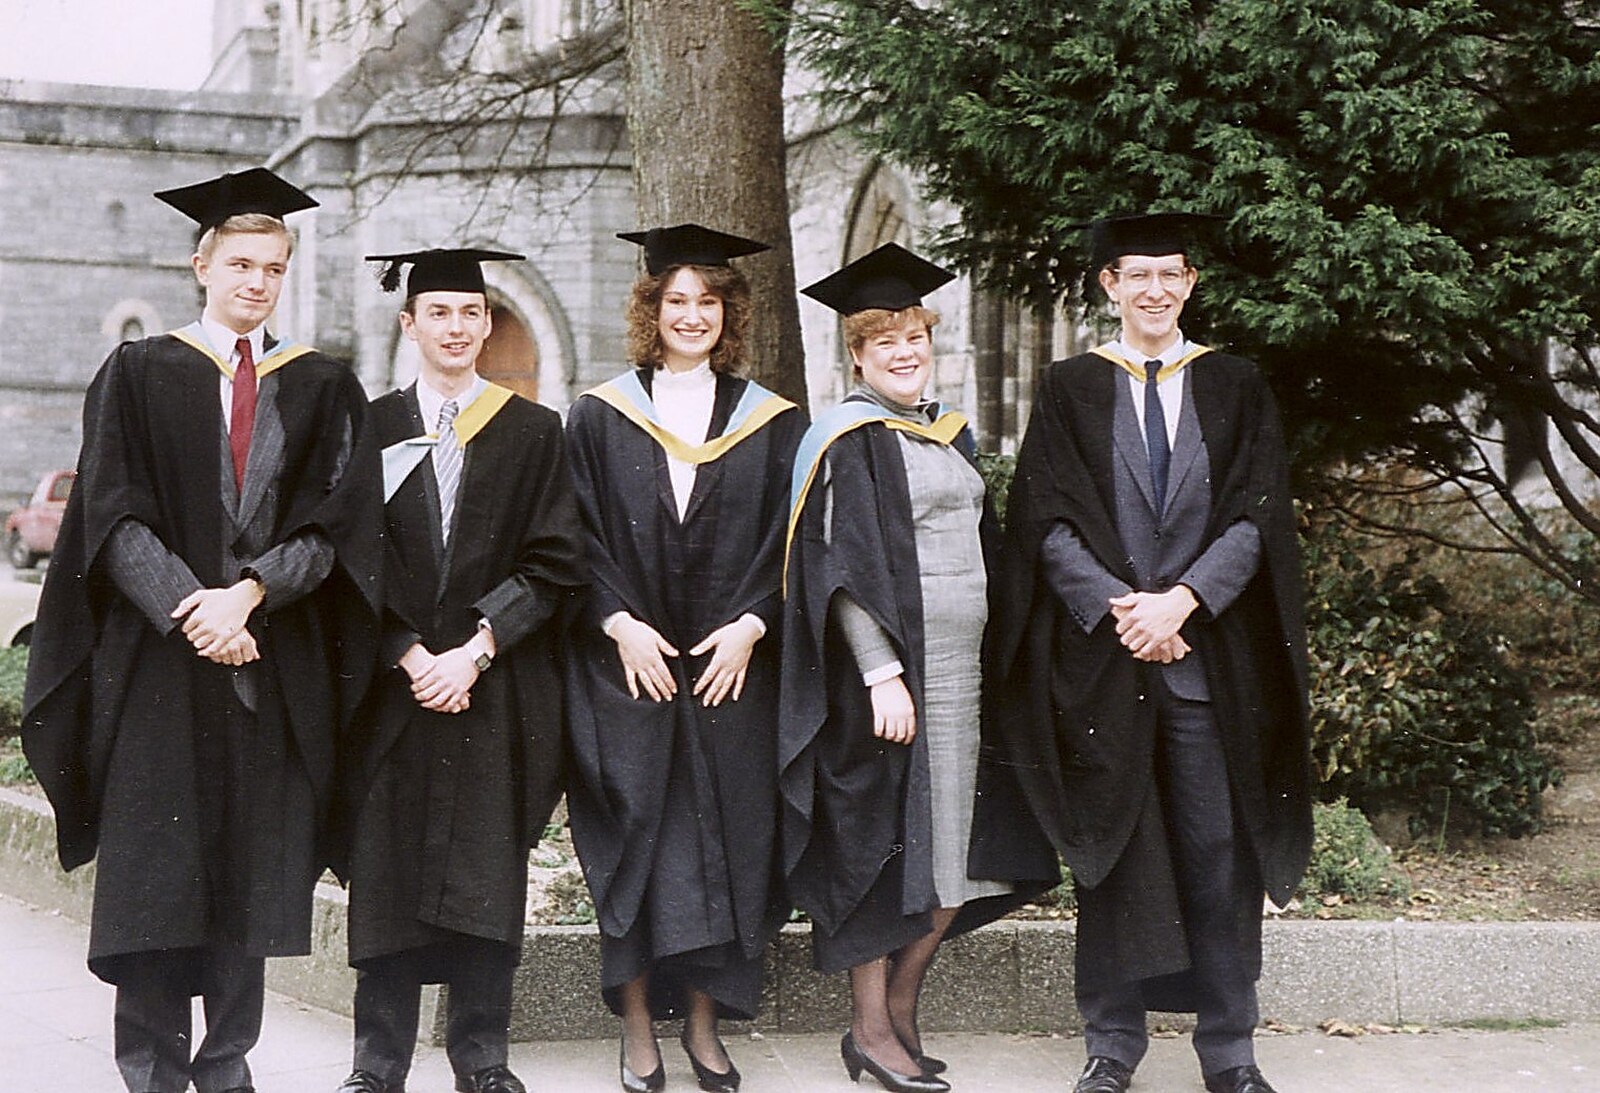 Nosher, John, Angela, Kate and Andy 'Jitsu' Dobie from Uni: Graduation Day, The Guildhall, Plymouth, Devon - 30th September 1989